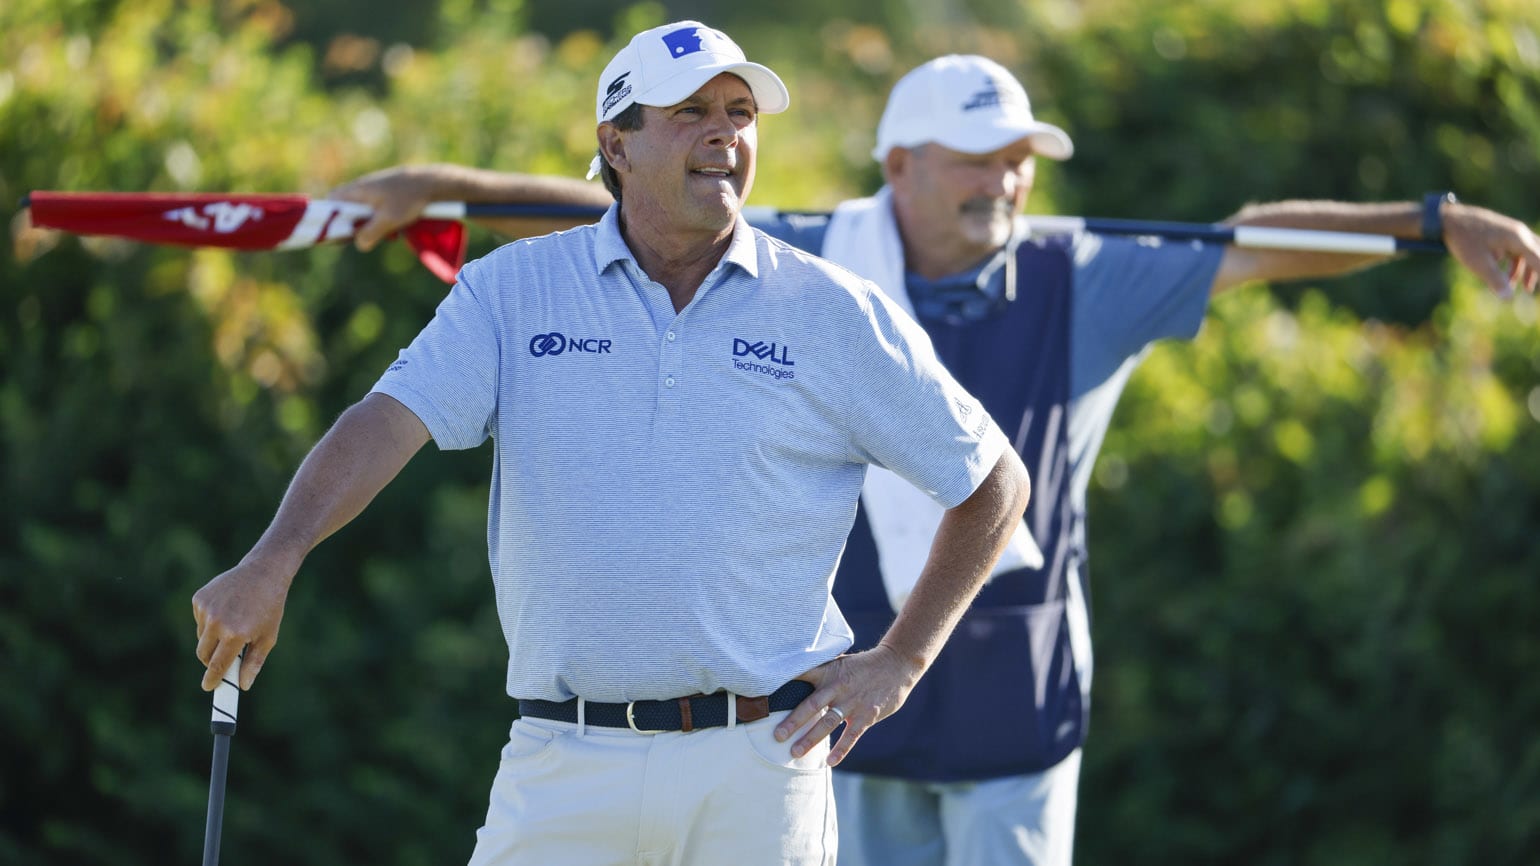 Buoyed by plenty of local support from friends, family and fans, Rhode Island's Billy Andrade delivered a 6-under 64 on Day 1 of the U.S. Senior Open at Newport Country Club. (USGA/Jonathan Ernst) 